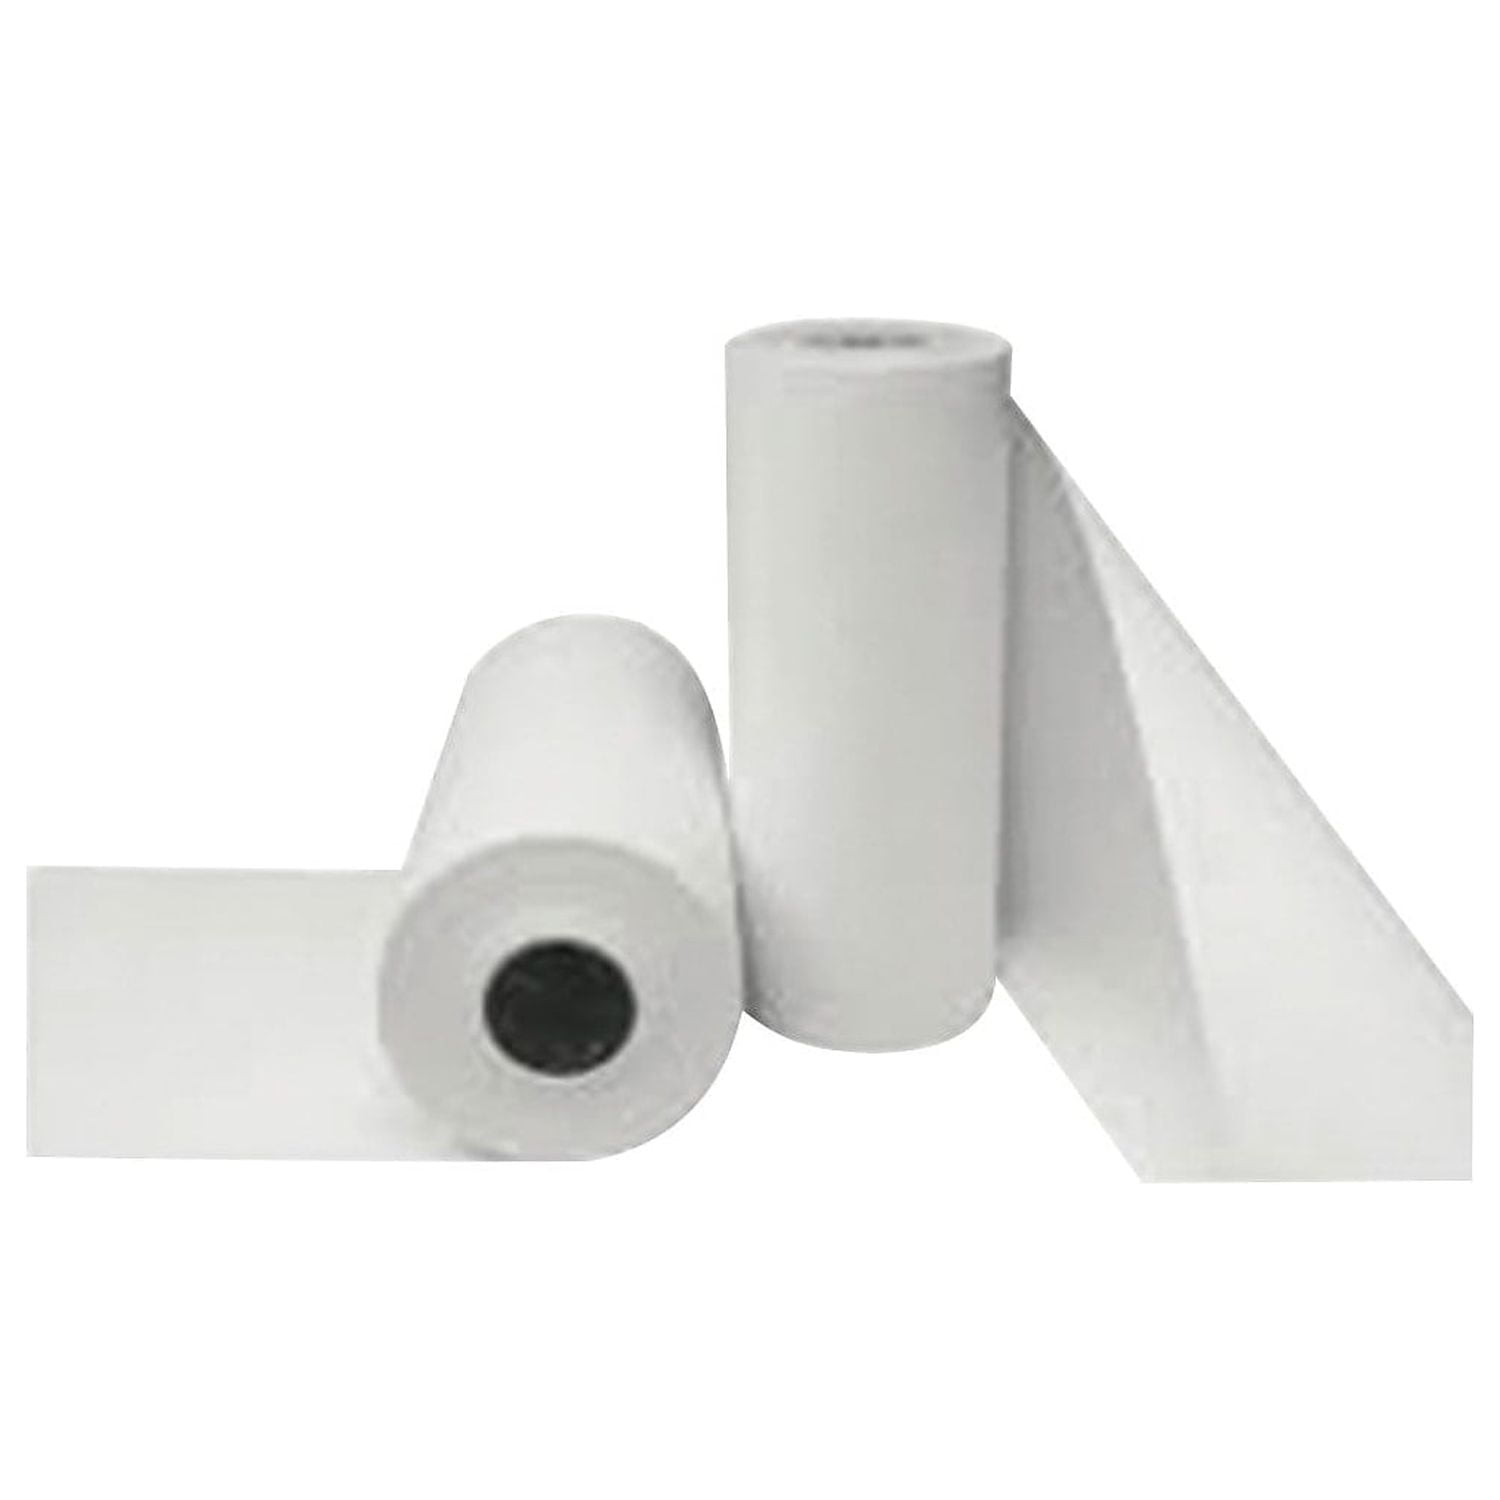 Discount Shipping USA Butcher Paper Roll, 40#, 12 x 1,000', White, 1 Roll,  by Discount Shipping USA - Yahoo Shopping